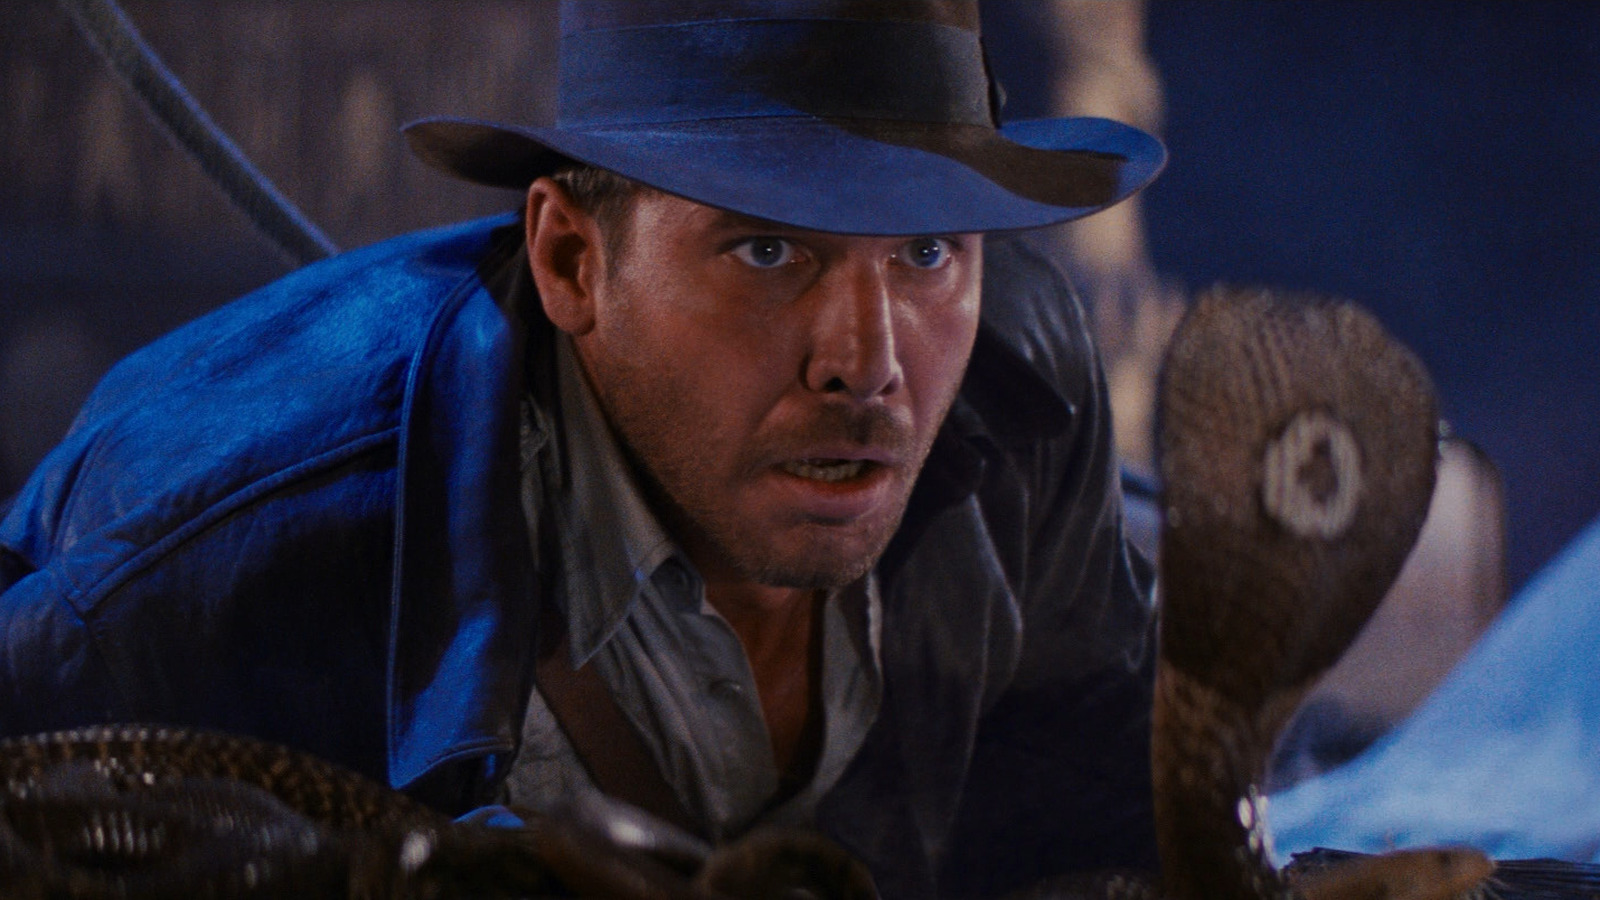 Raiders Of The Lost Ark's Snake Handler Made A Surprise Cameo In The Movie